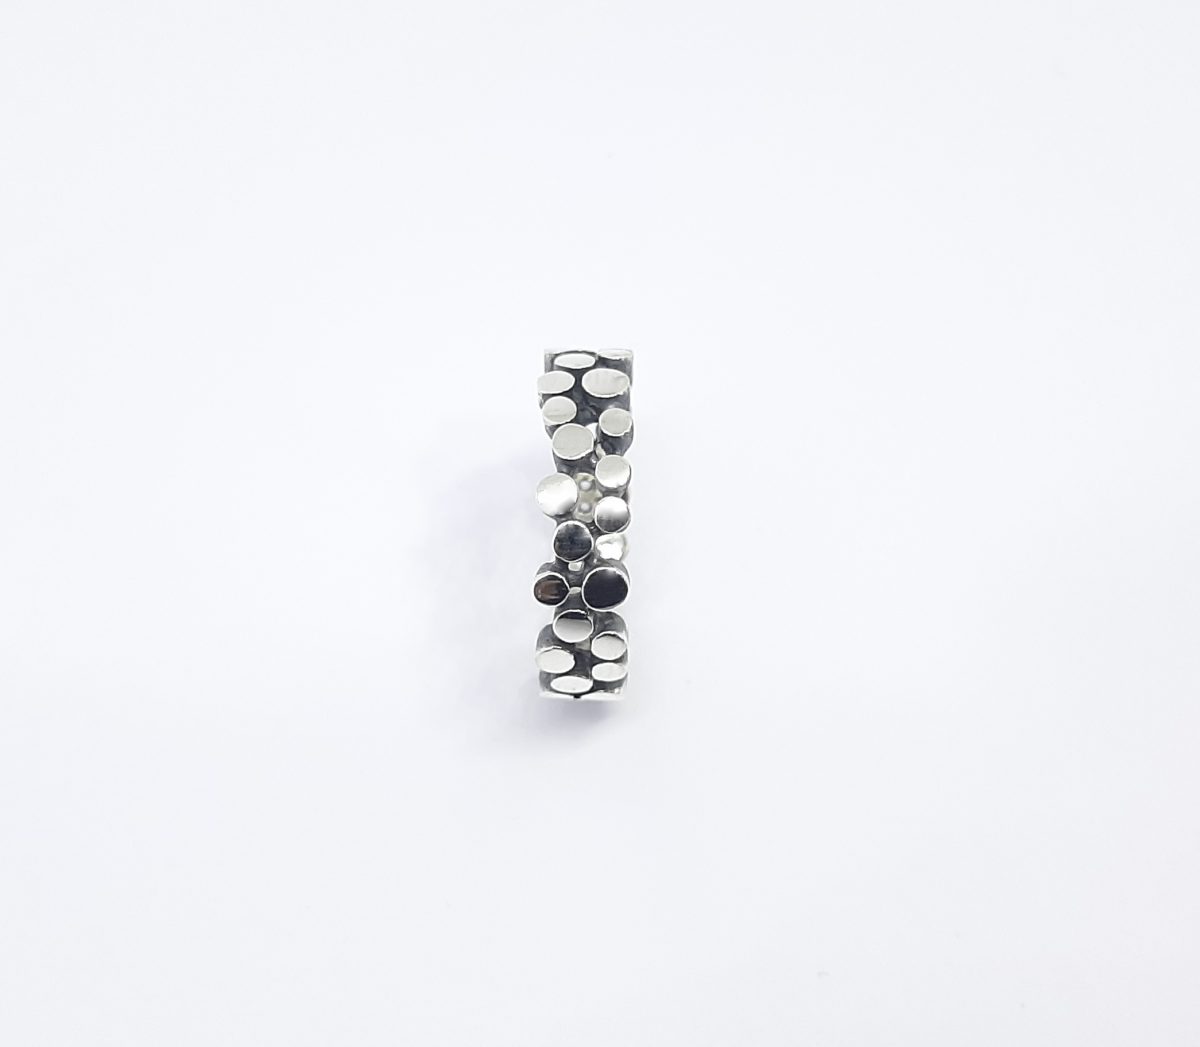 Dainty Ring with Dots Sterling Silver 925, Minimalist Ring